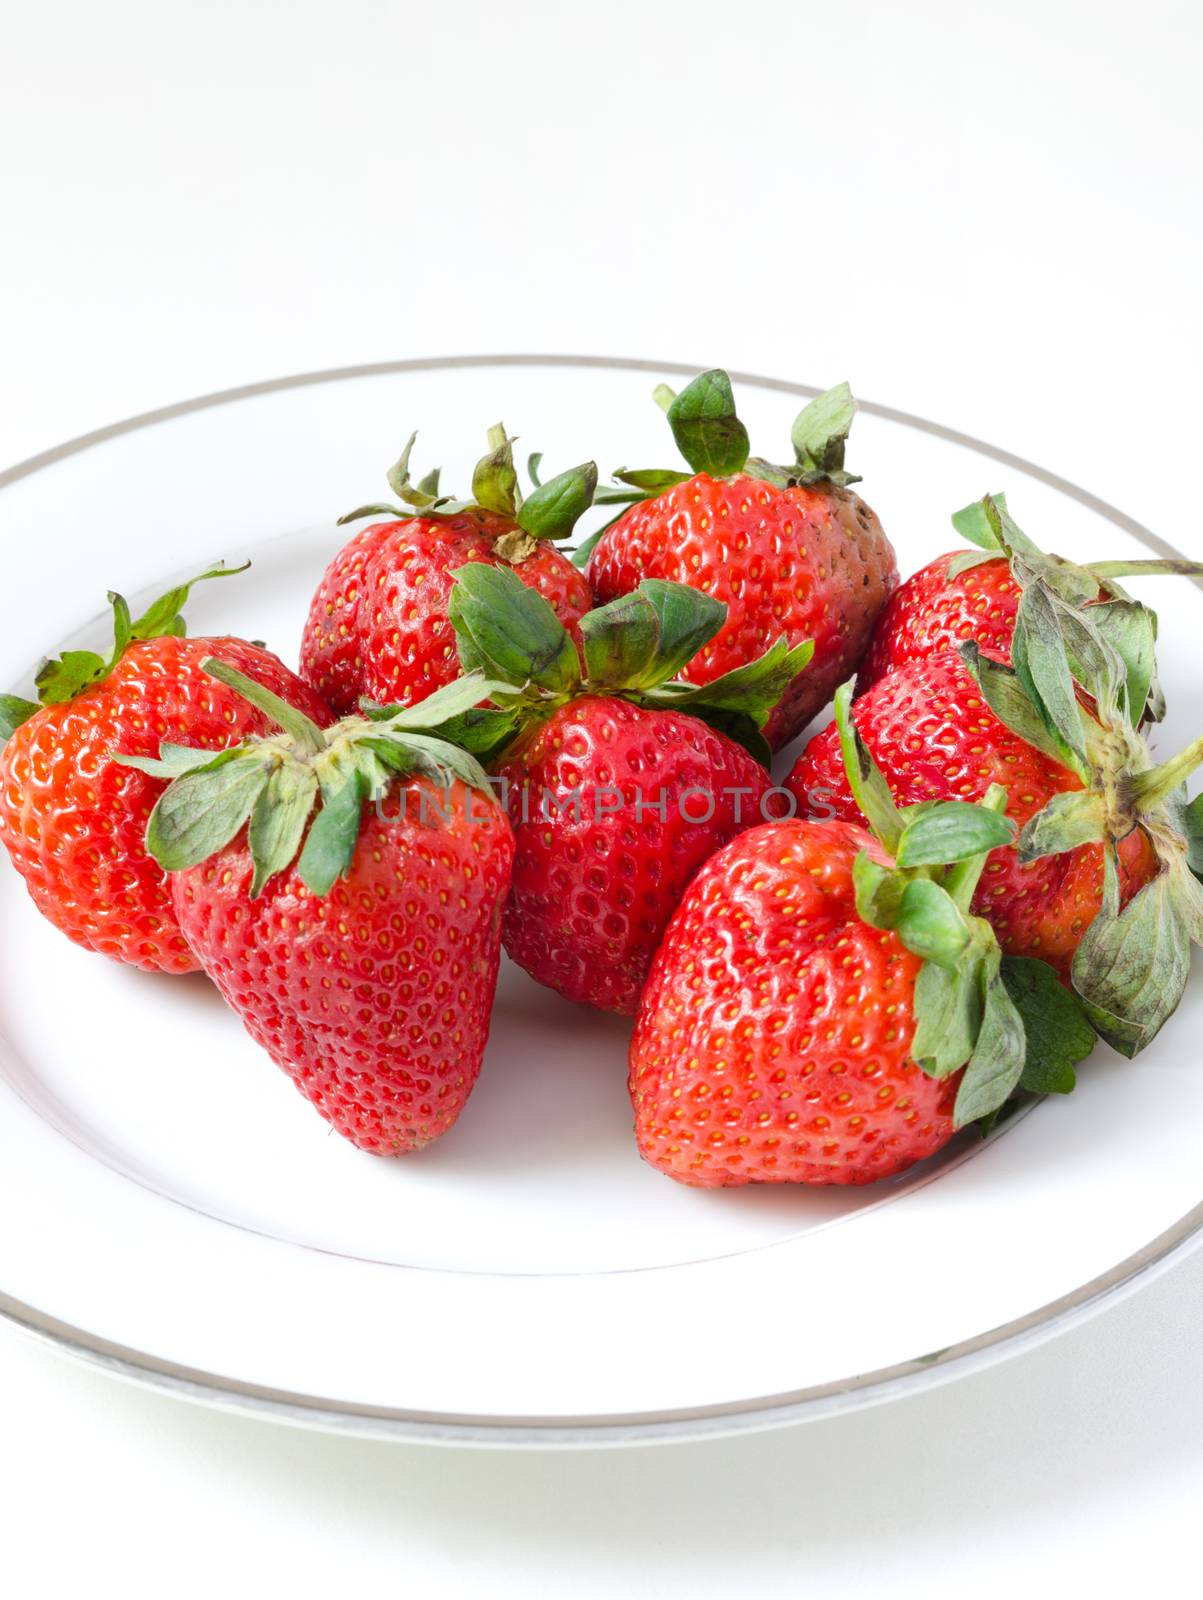 Strawberries in a plate on white by siraanamwong